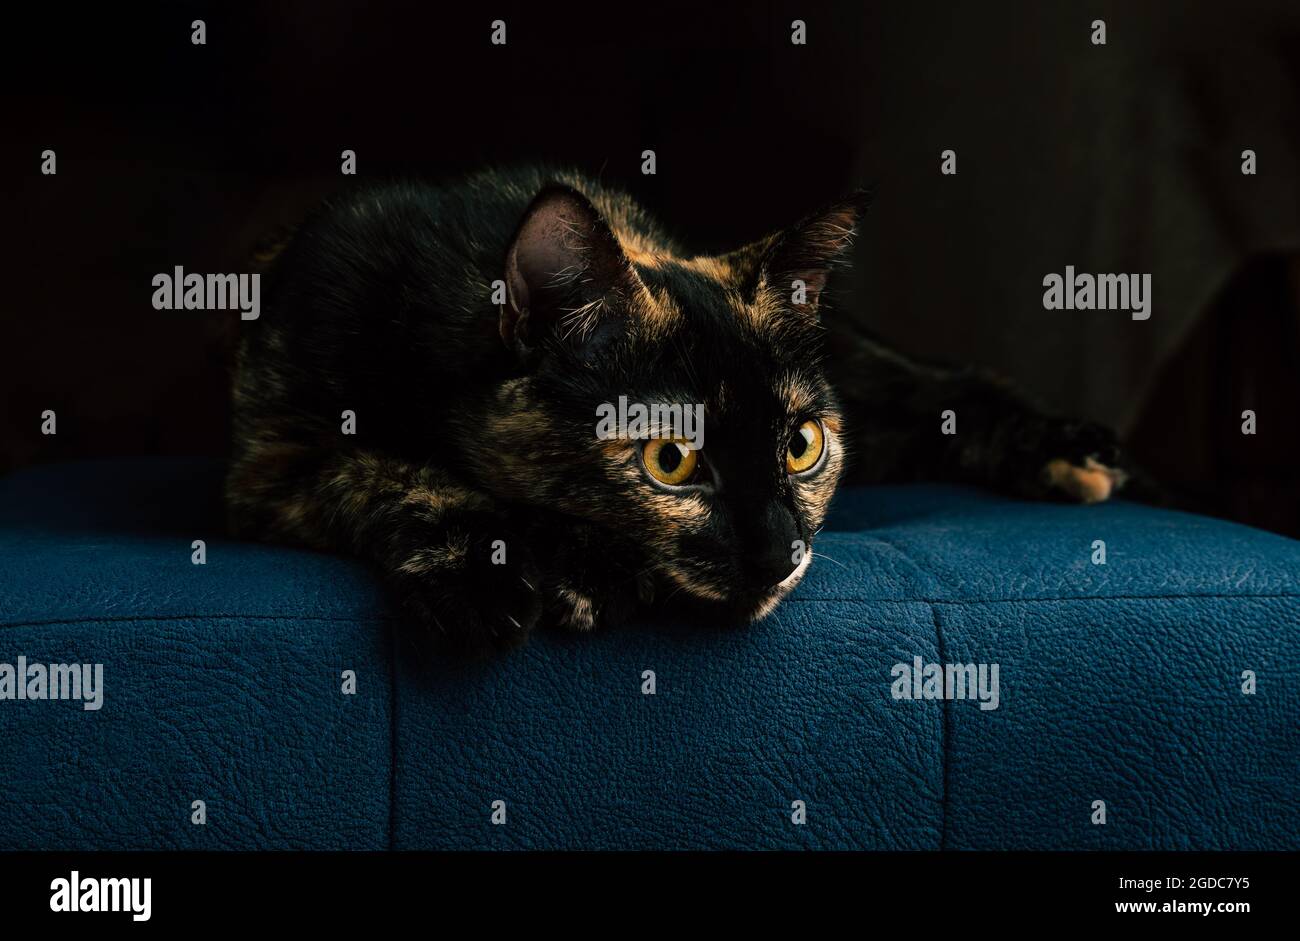 A black cat with red spots lies on a blue sofa Stock Photo